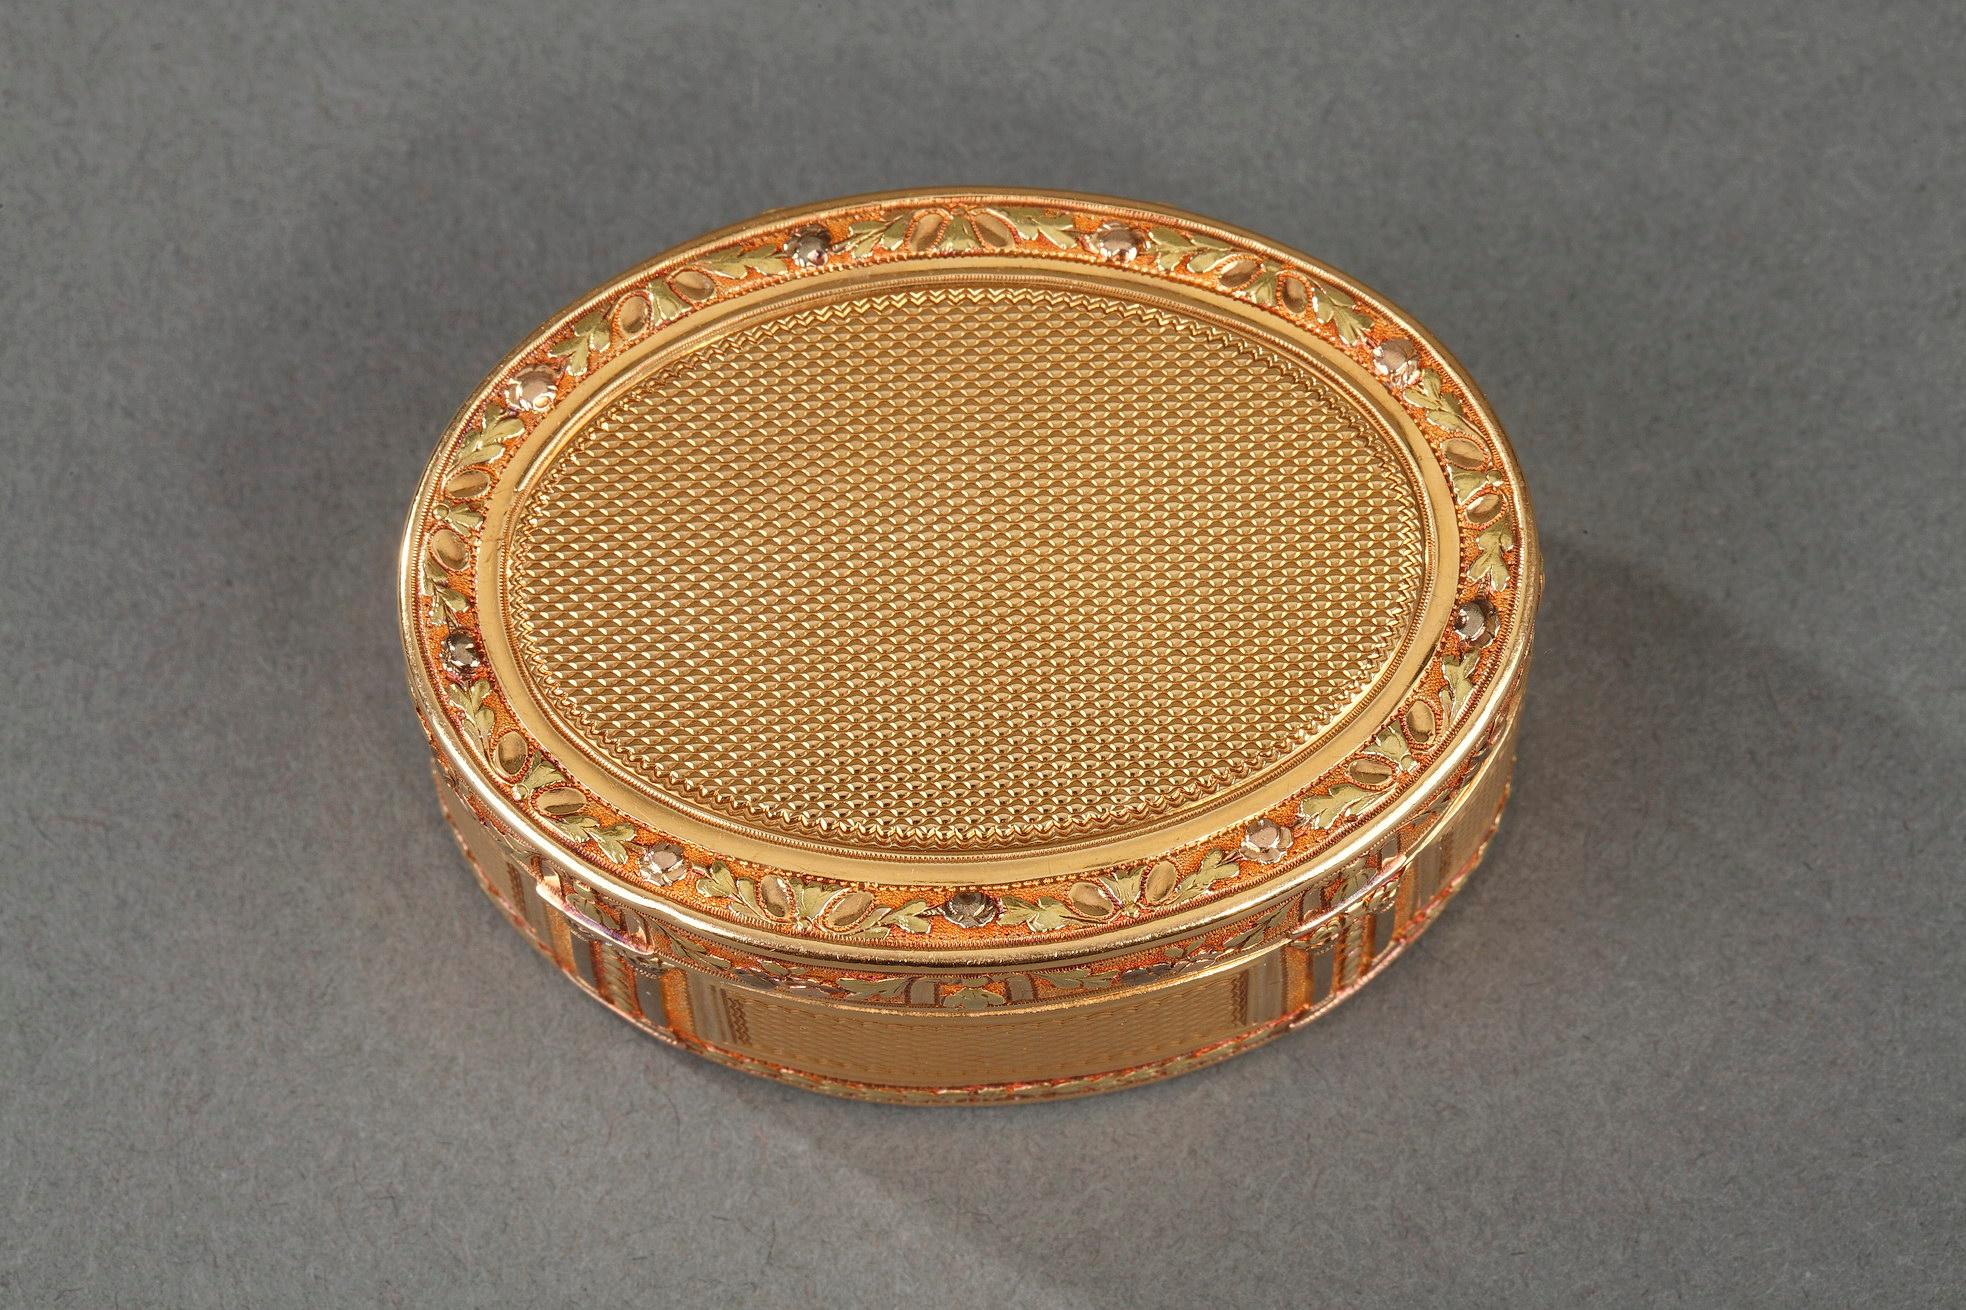 Oval snuff box in three tones of gold. The hinged lid is decorated with an intricate scale pattern surrounded by a frieze of roses, ribbons, and pink, green and white gold leaves. The side of the box features four panels with the same scale pattern.